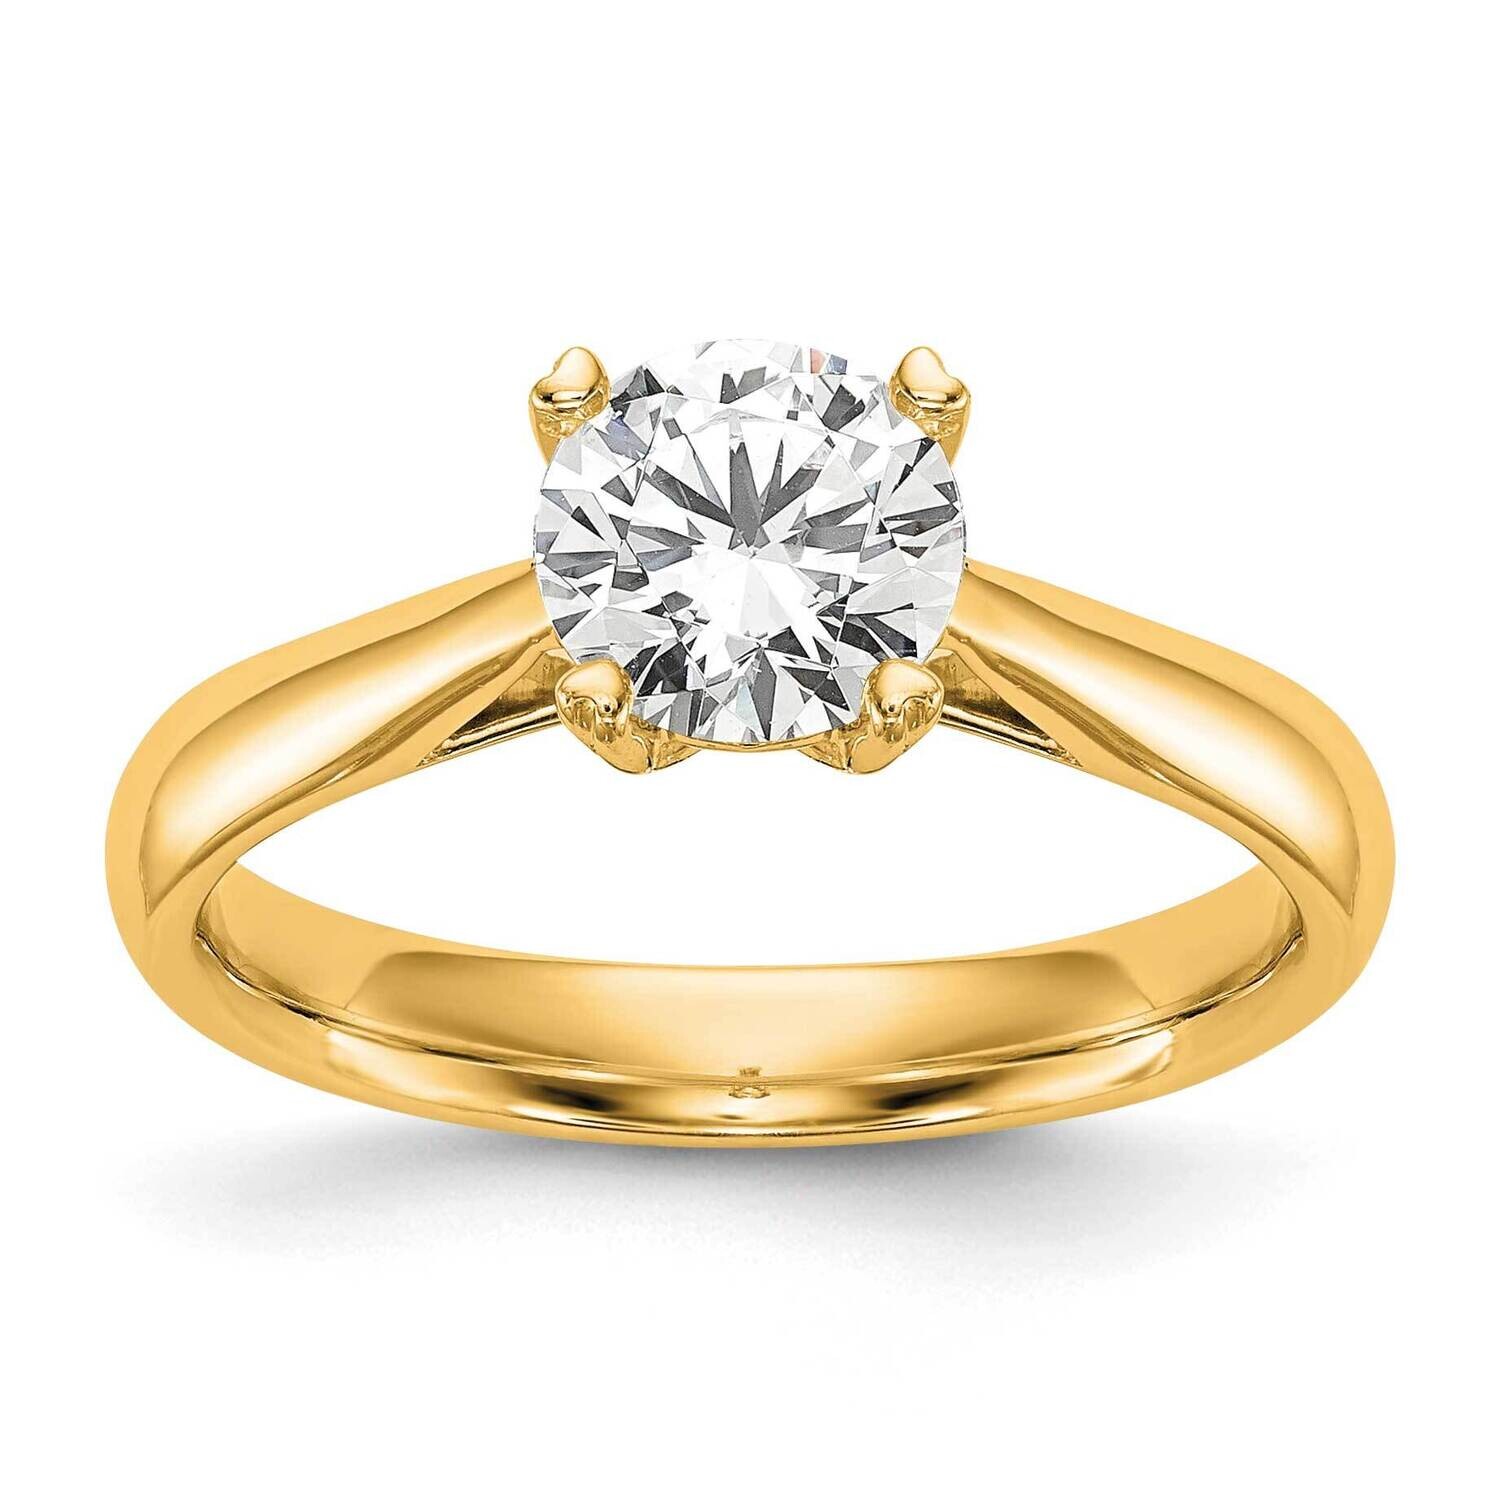 1 Ct Round Certifiedsi1/Si2 G H I Diamond Solitaire Engag 14k Gold RM1930E-100C-LG